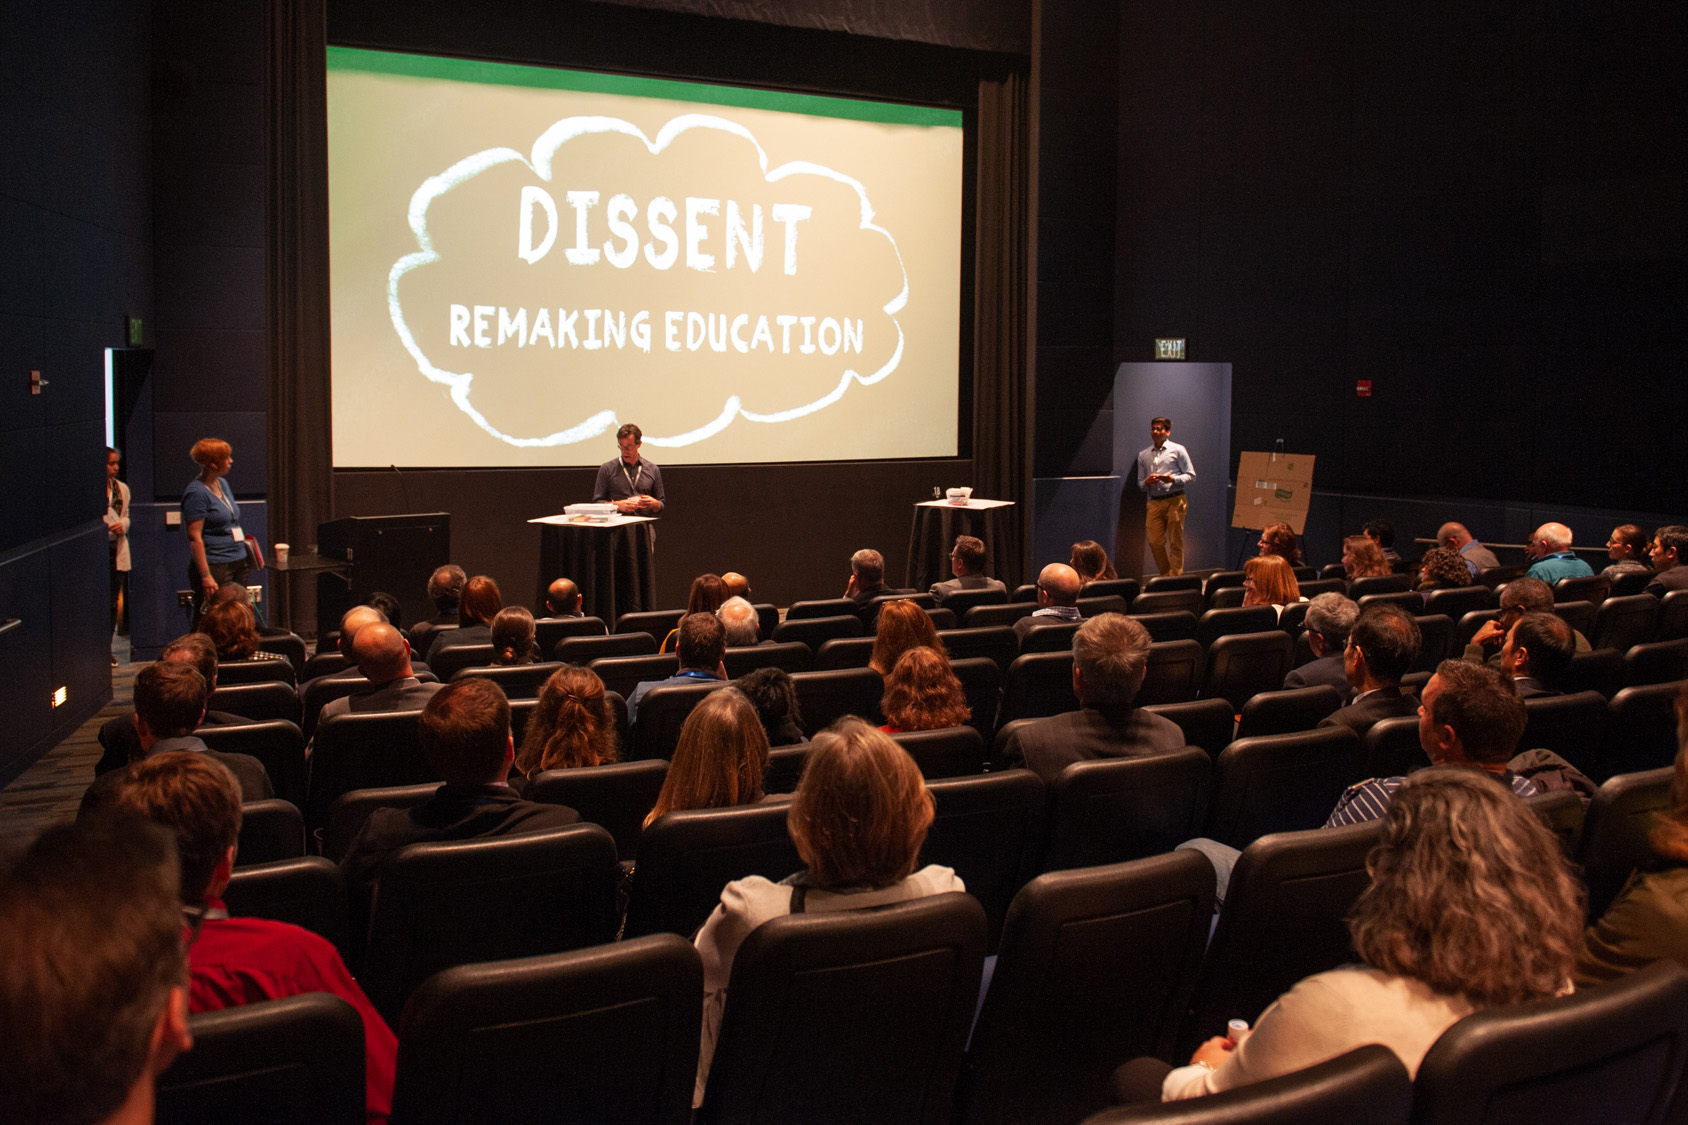 Dissent participants gather in an auditorium for an overview of the session.